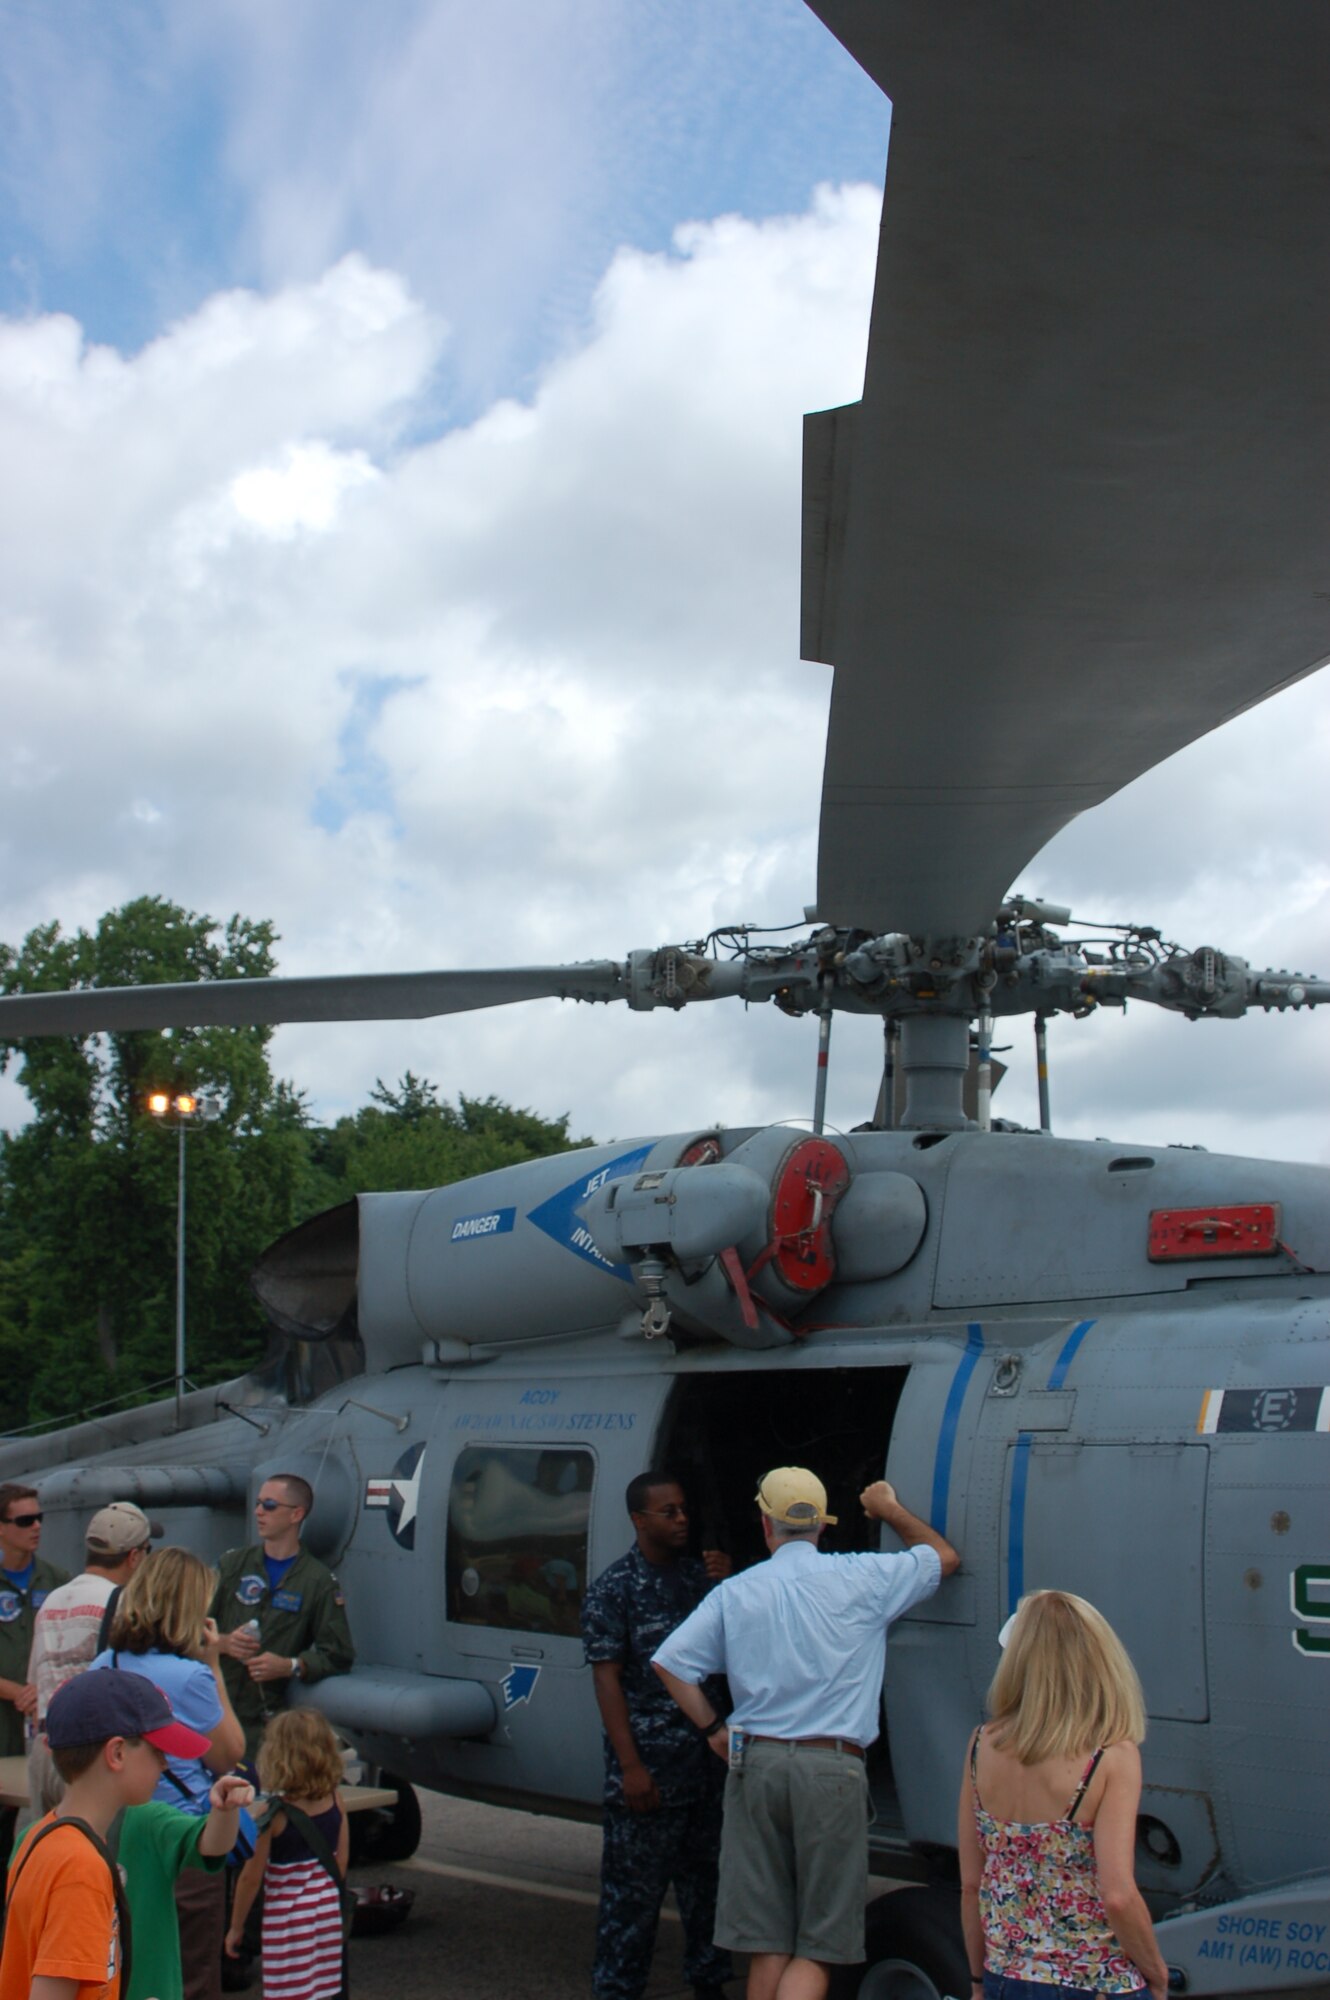 Visitors check out an SH-60R “Seahawk” at an open house at Bradley ANG Base, East Granby, Conn. as part of the annual Space and Aviation Day event July 18, 2009.  (U.S. Air Force photo by Tech. Sgt. Josh Mead)